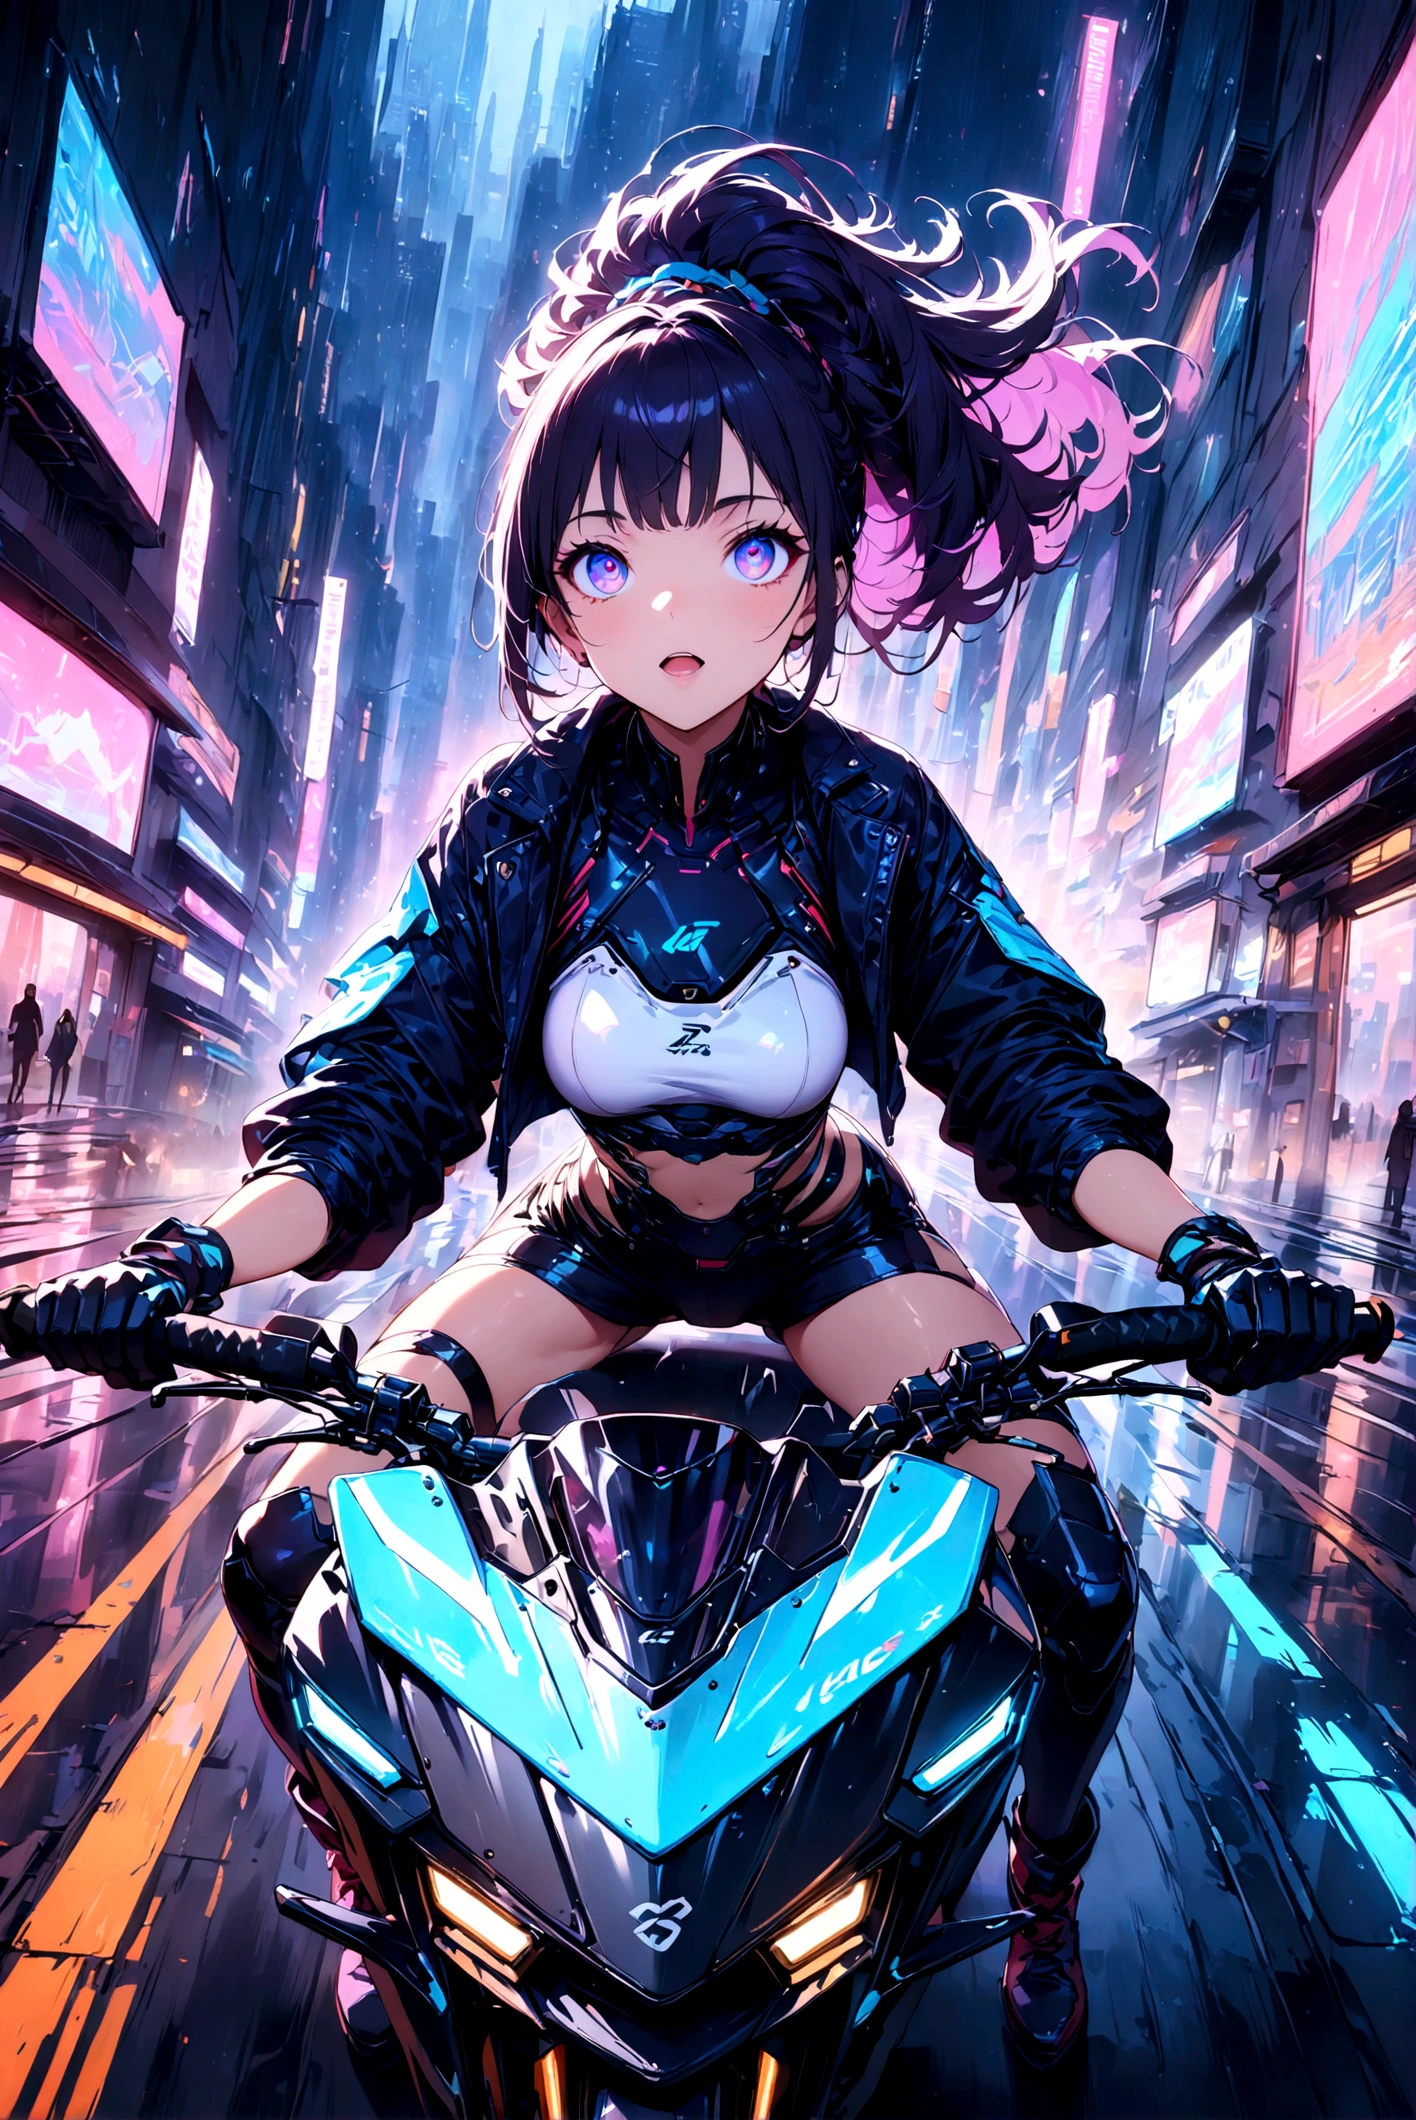 (((Looking up)))，1 girl，(((Driving a large motorcycle through the city)))，laughing out loud， - Futuristic cityscape，Late Night，cyberpunk，Neon， - cyberpunk aesthetic - Neon lights - Nighttime setting - Detailed and vibrant illustration - High-tech environment - Woman in futuristic outfit - Motorcycle - Dynamic pose - Urban street 最佳画质，Maximum resolution，masterpiece，Crazy details， best quality, masterpiece, illustration, ultra-detailed, beautiful detailed eyes, ,